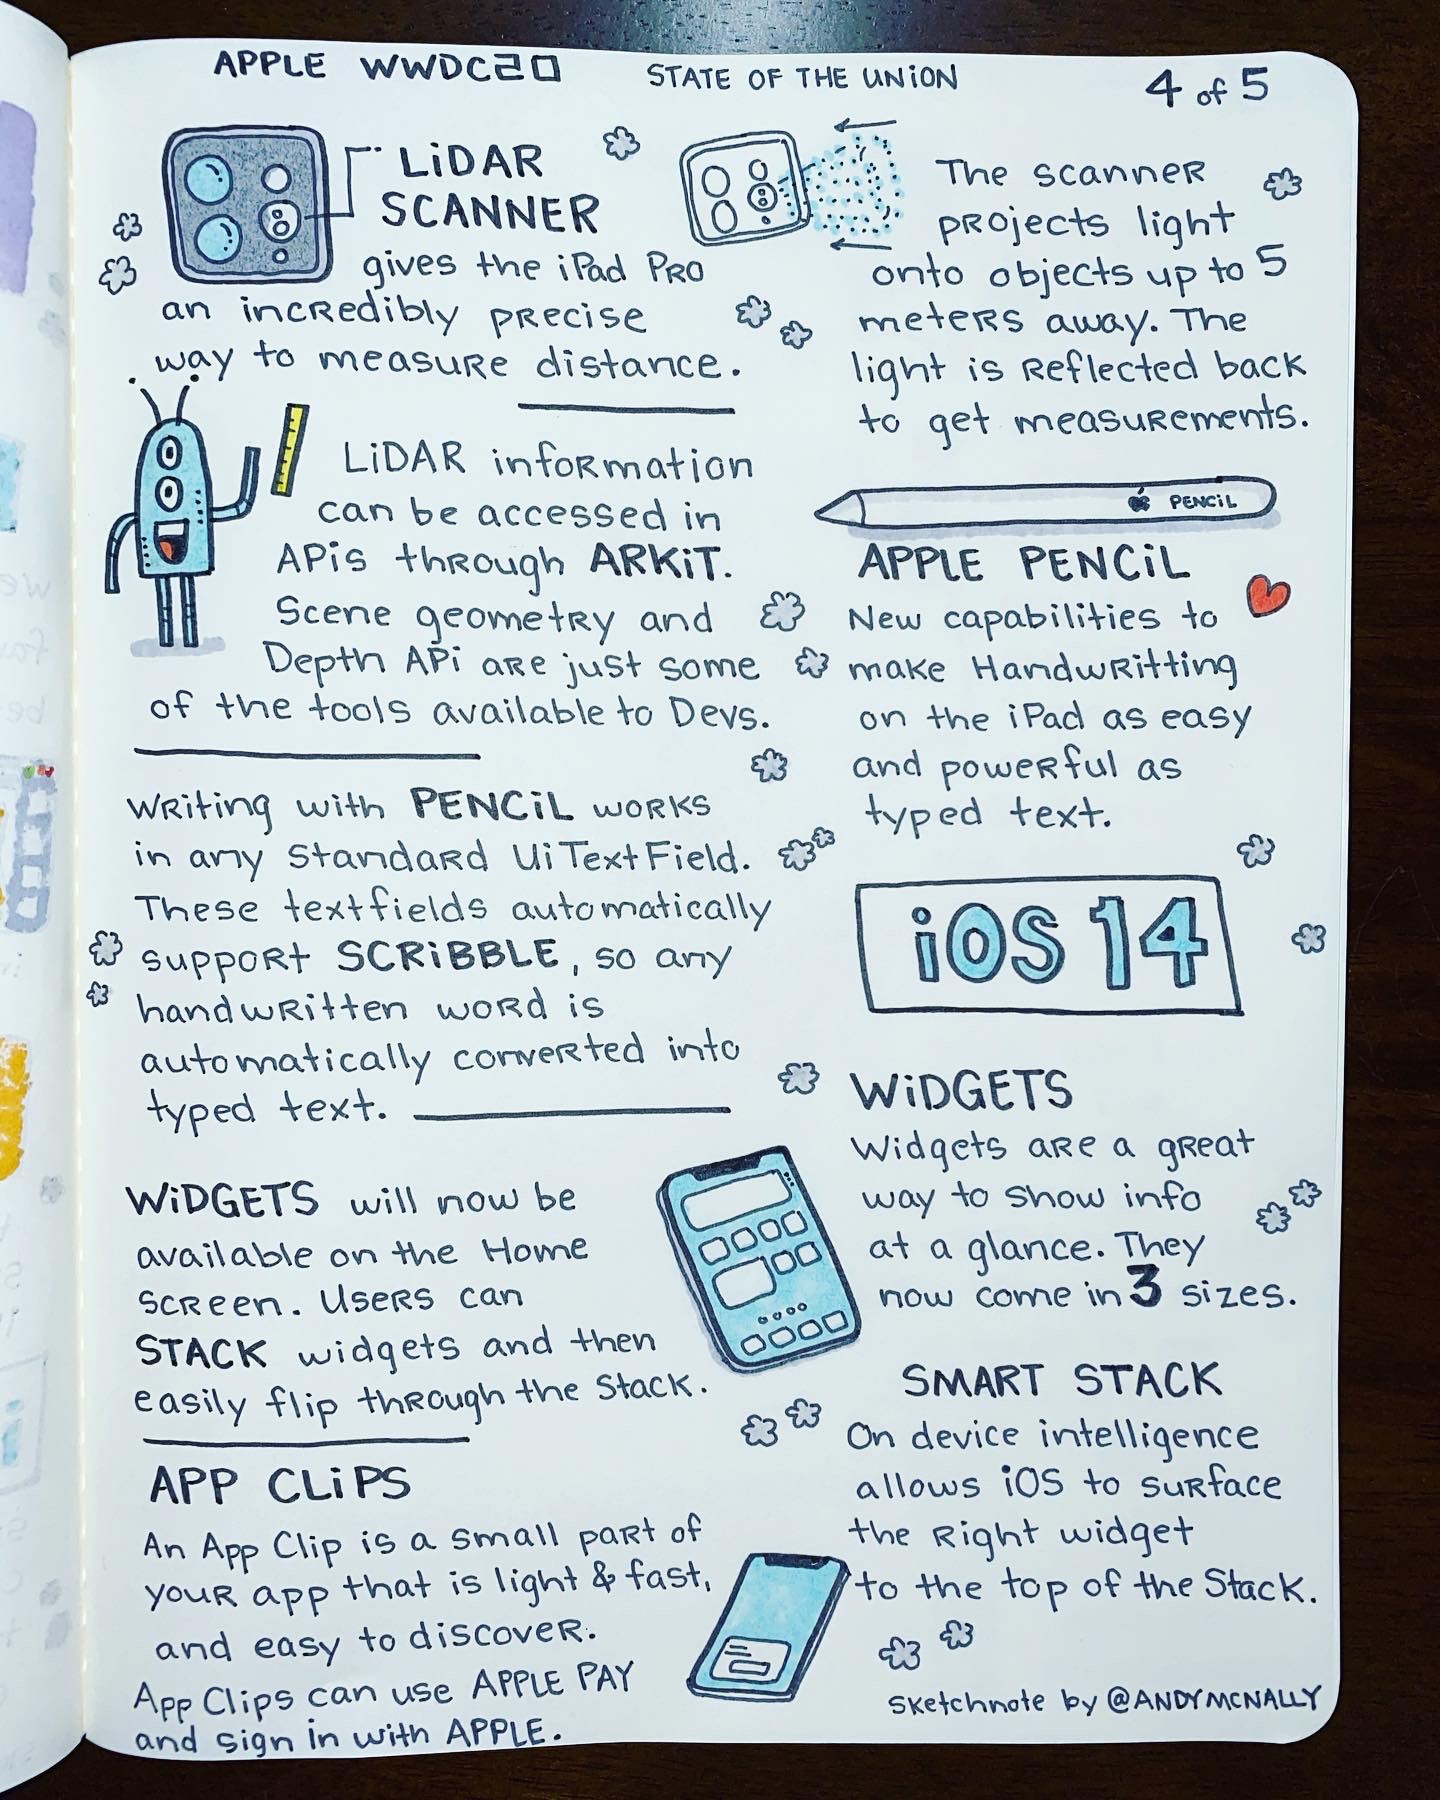 Apple Platforms State of the Union - WWDC 2020 drawing 4 of 5